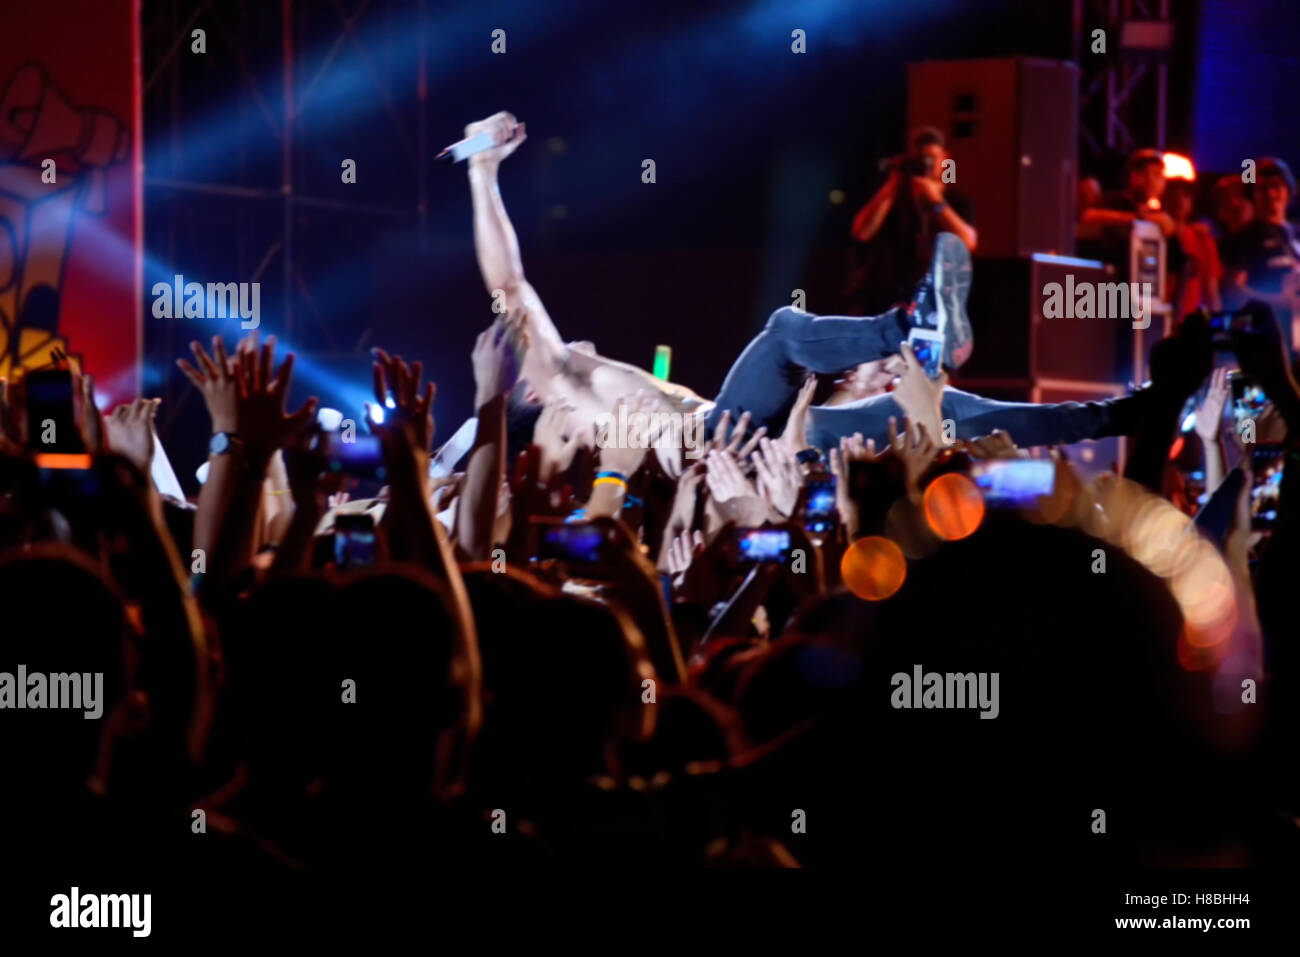 blurred image of singer on top crowd surfing at a music concert Stock Photo